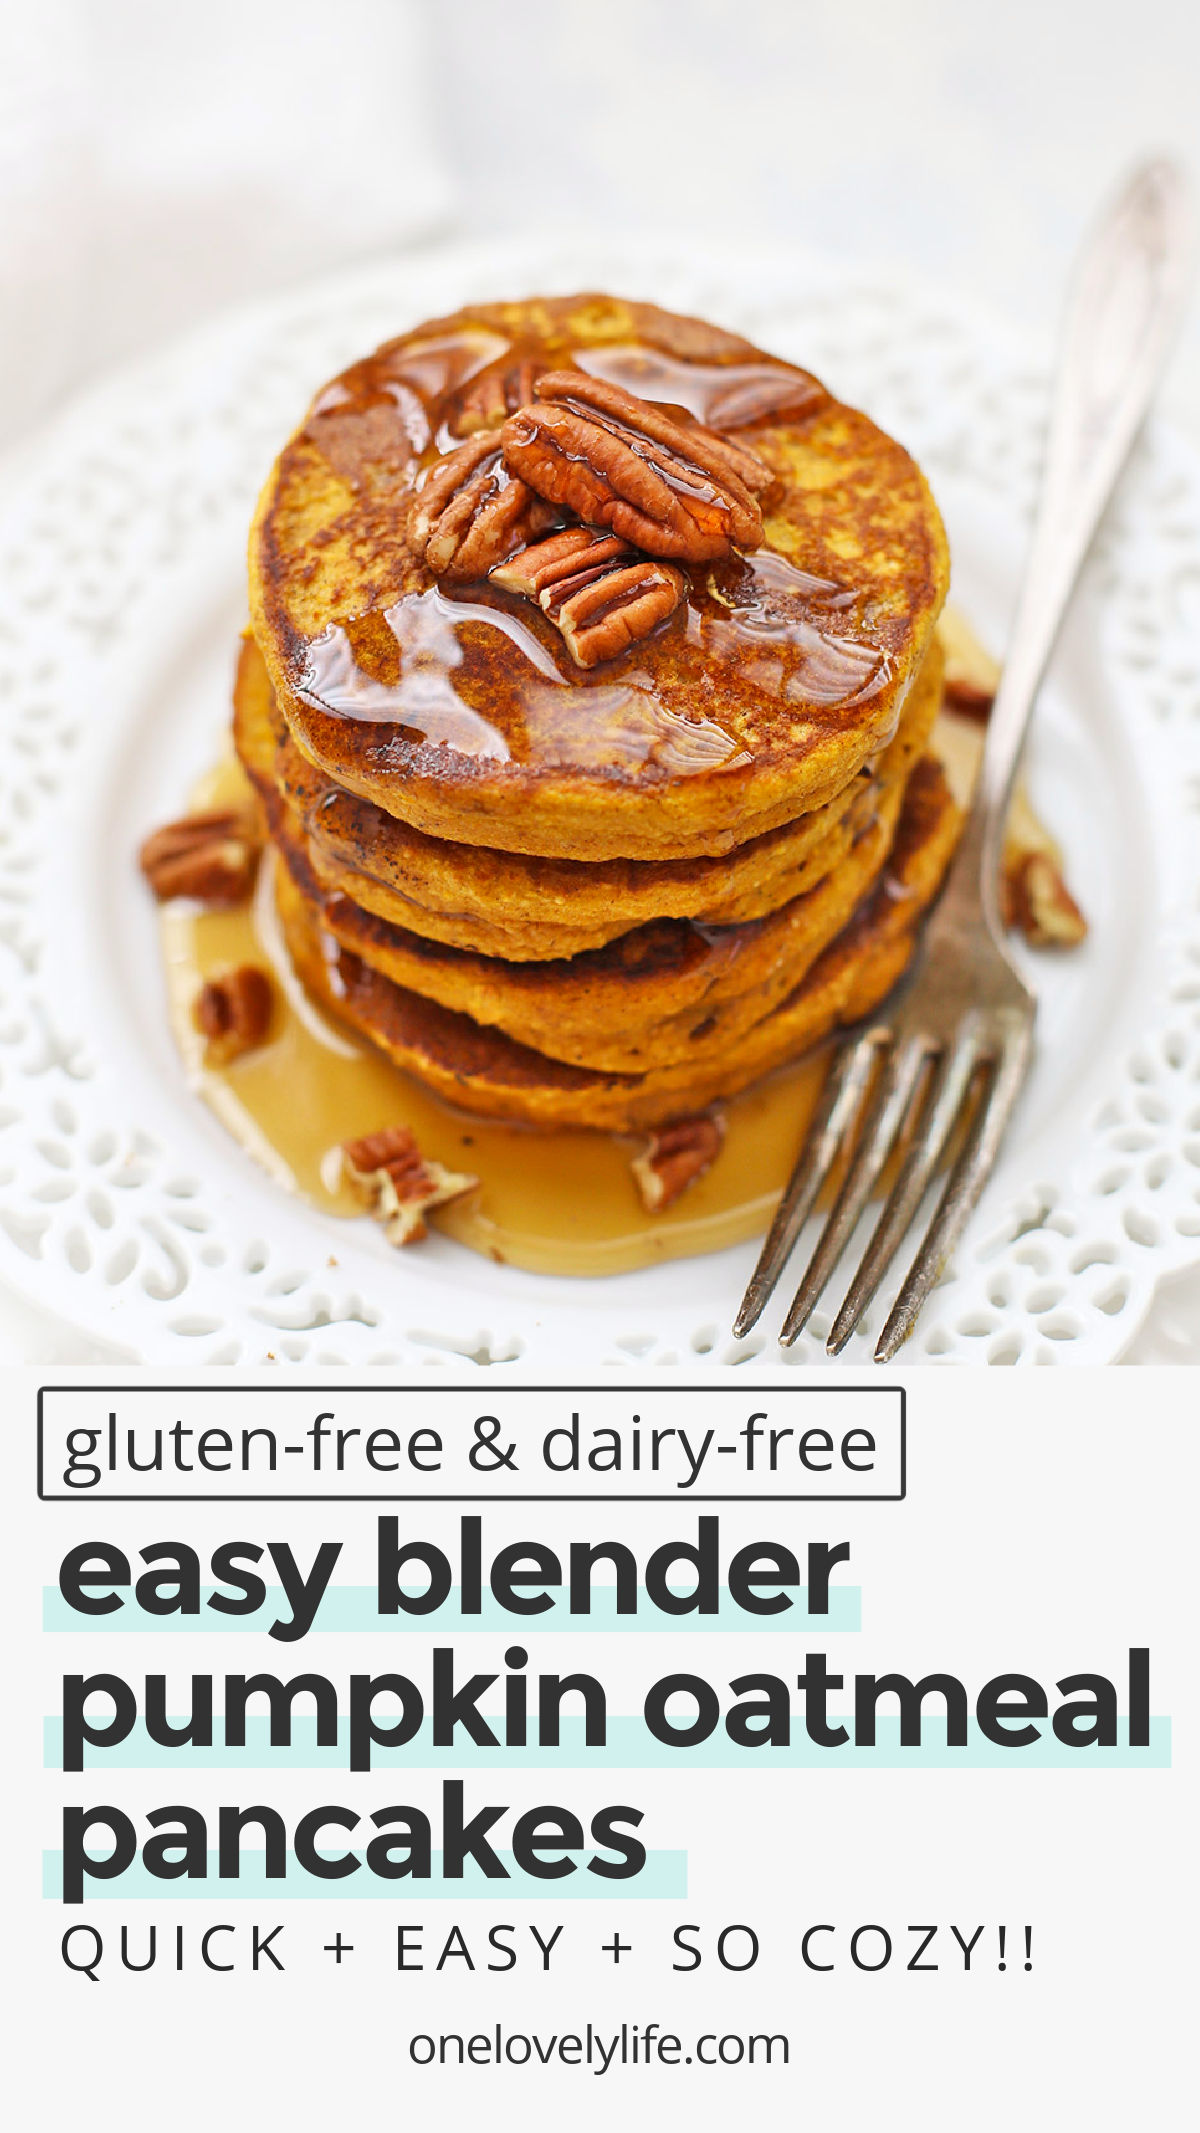 Blender Pumpkin Oatmeal Pancakes - These healthy pumpkin pancakes are gluten & dairy free. SO EASY, since they're made in the blender! It's the BEST pumpkin pancakes recipe! // blender pancakes // pumpkin pancakes // pumpkin oatmeal pancakes // gluten free pumpkin pancakes #glutenfree #dairyfree #pancakes #pumpkin #blenderpancakes #pumpkinpancakes #oatmealpancakes